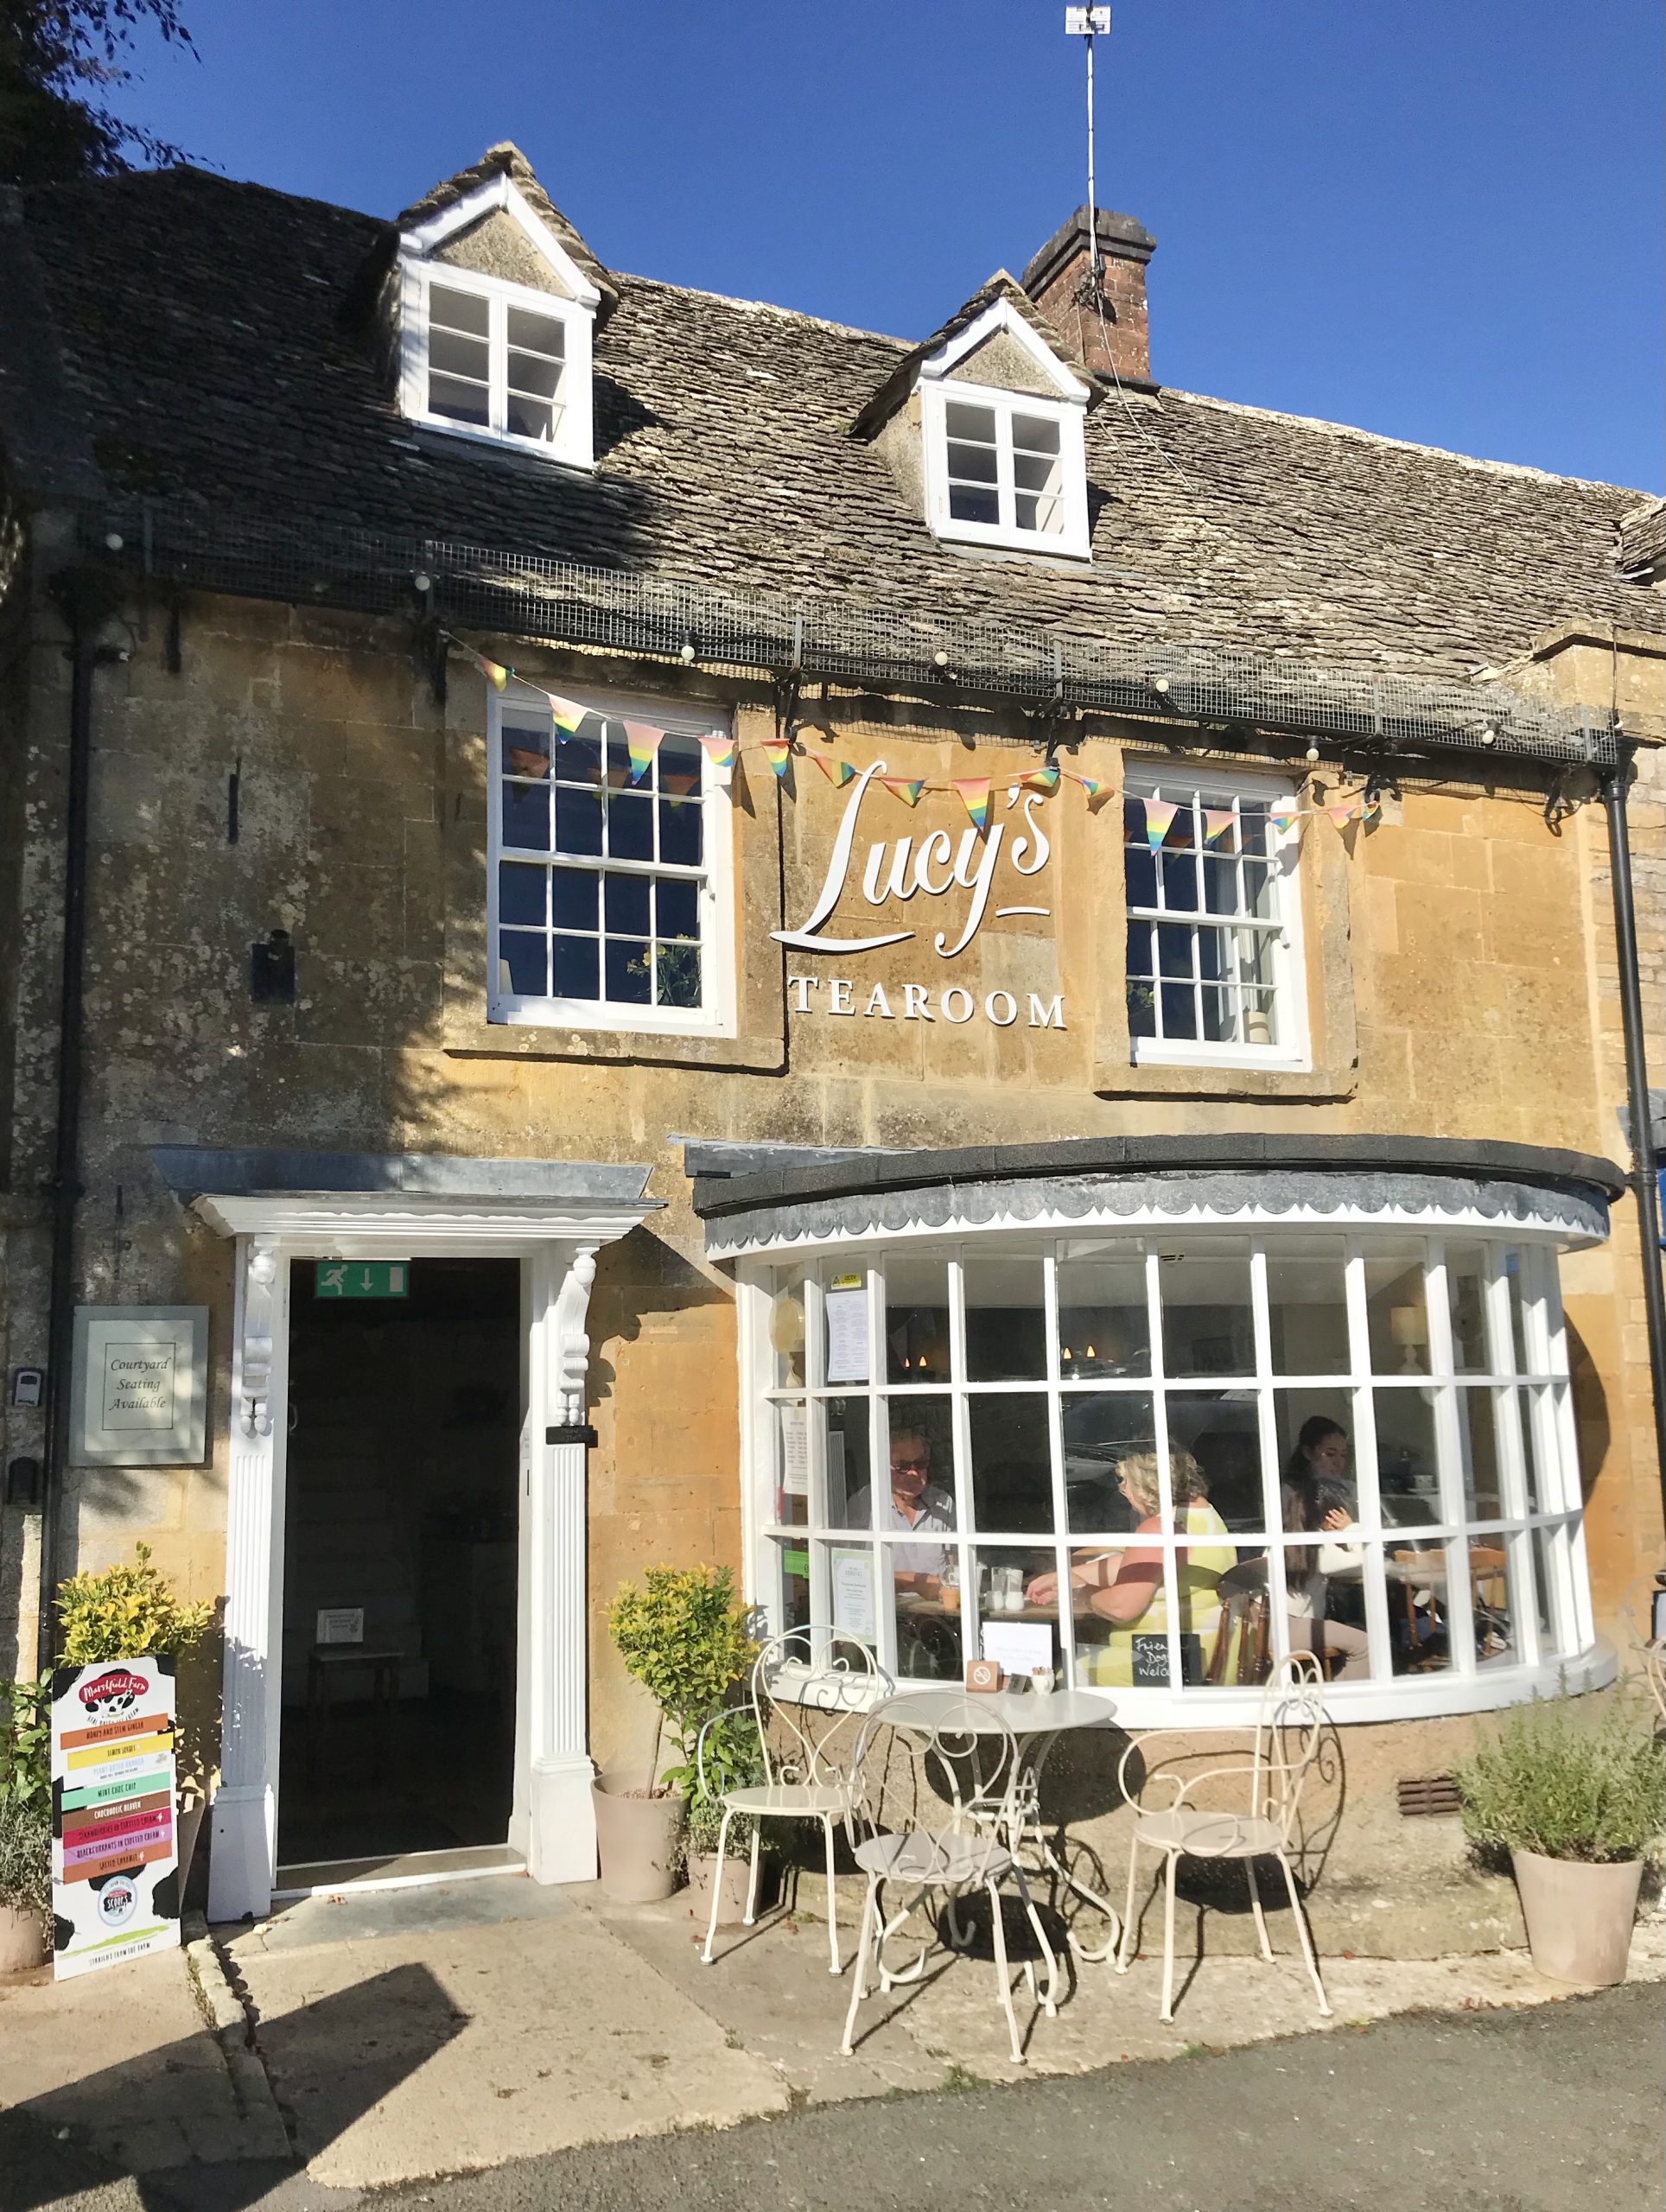 Lucy’s Tearoom – Stow-on-the-Wold